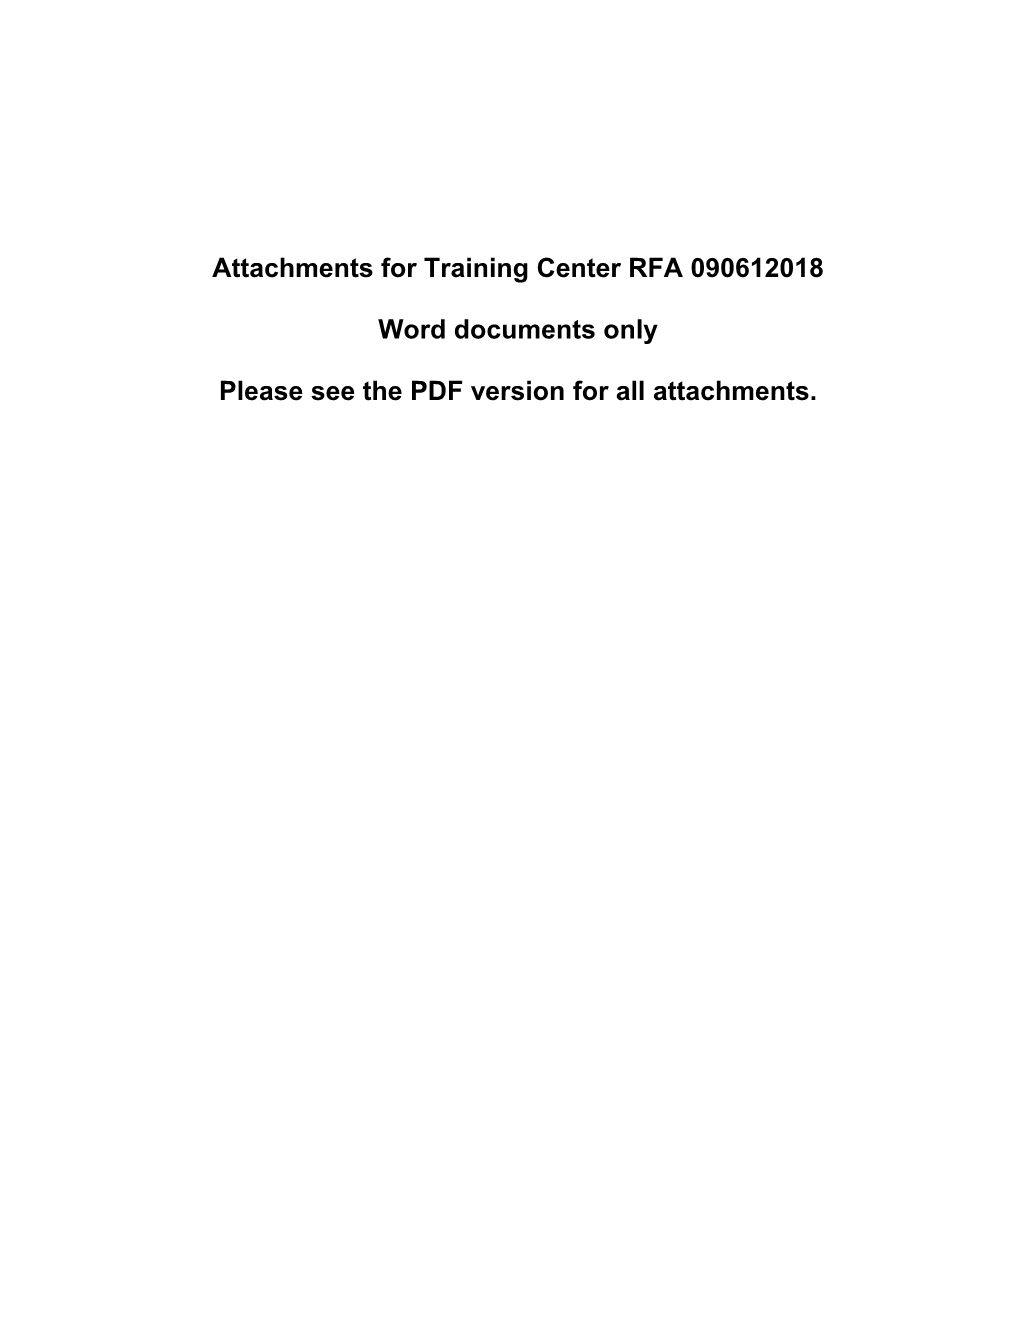 Attachments for Training Center RFA 090612018